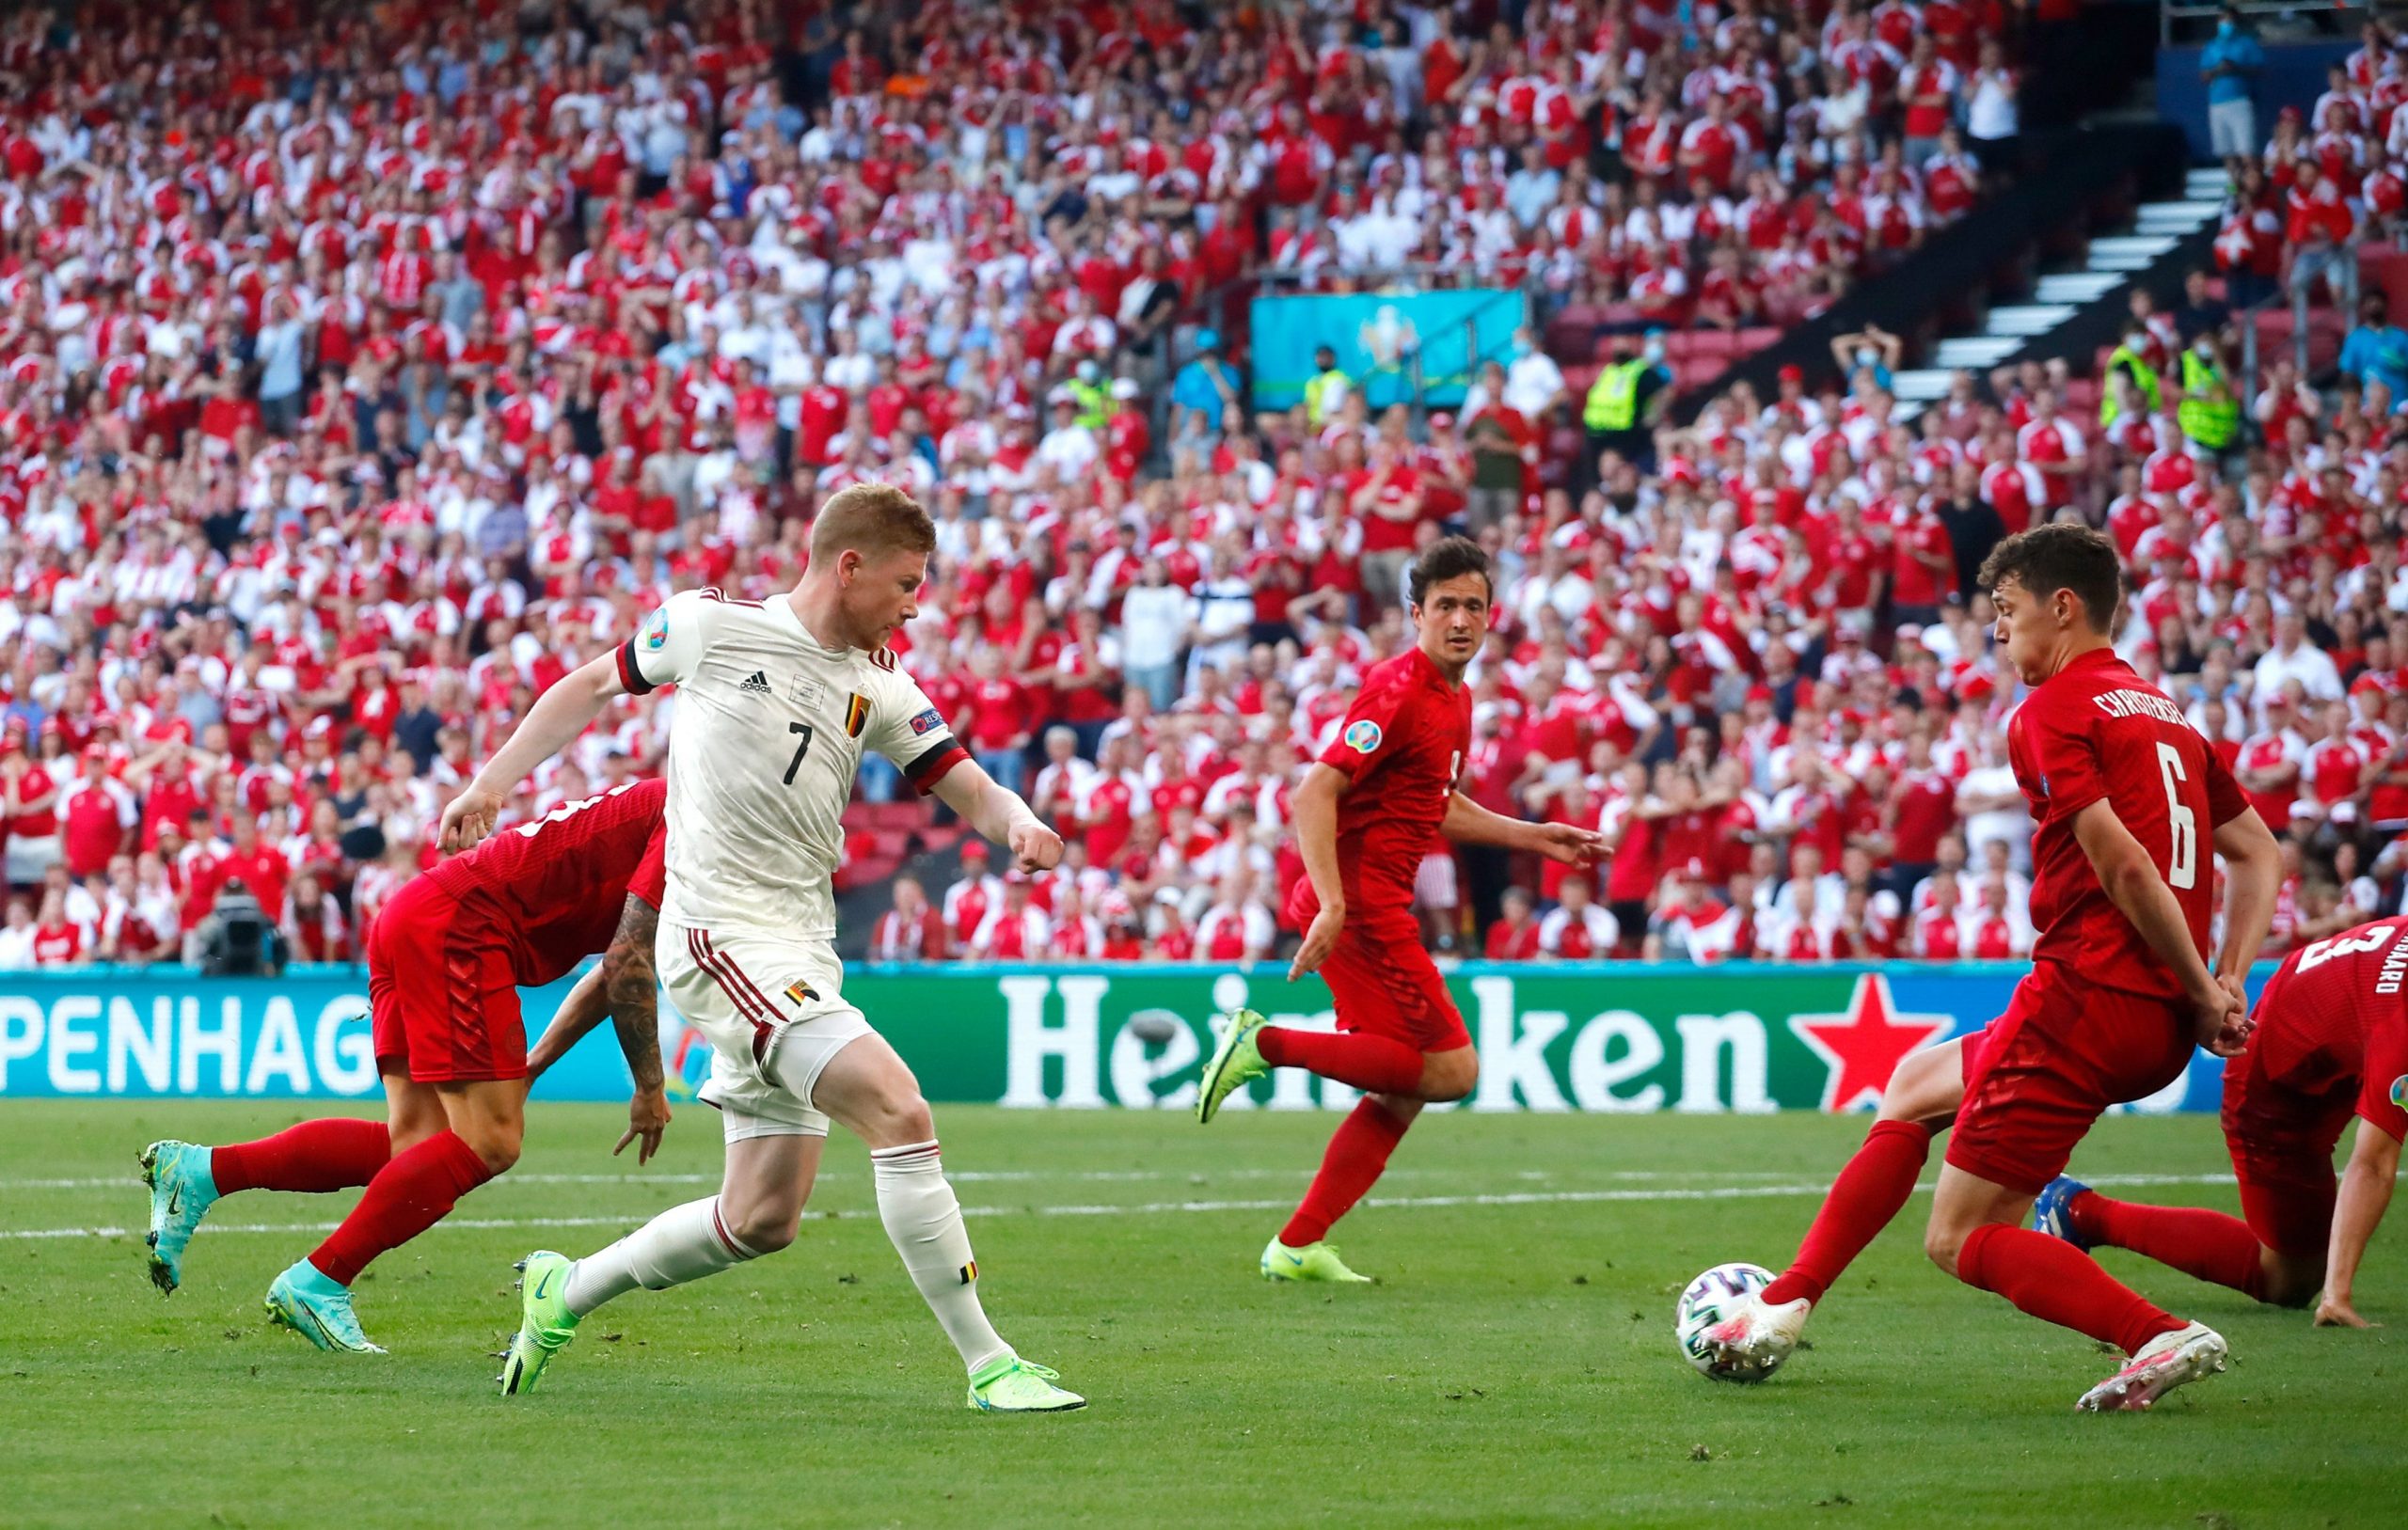 EURO 2020: Kevin De Bruyne on the mark as Belgium secure Round of 16 spot